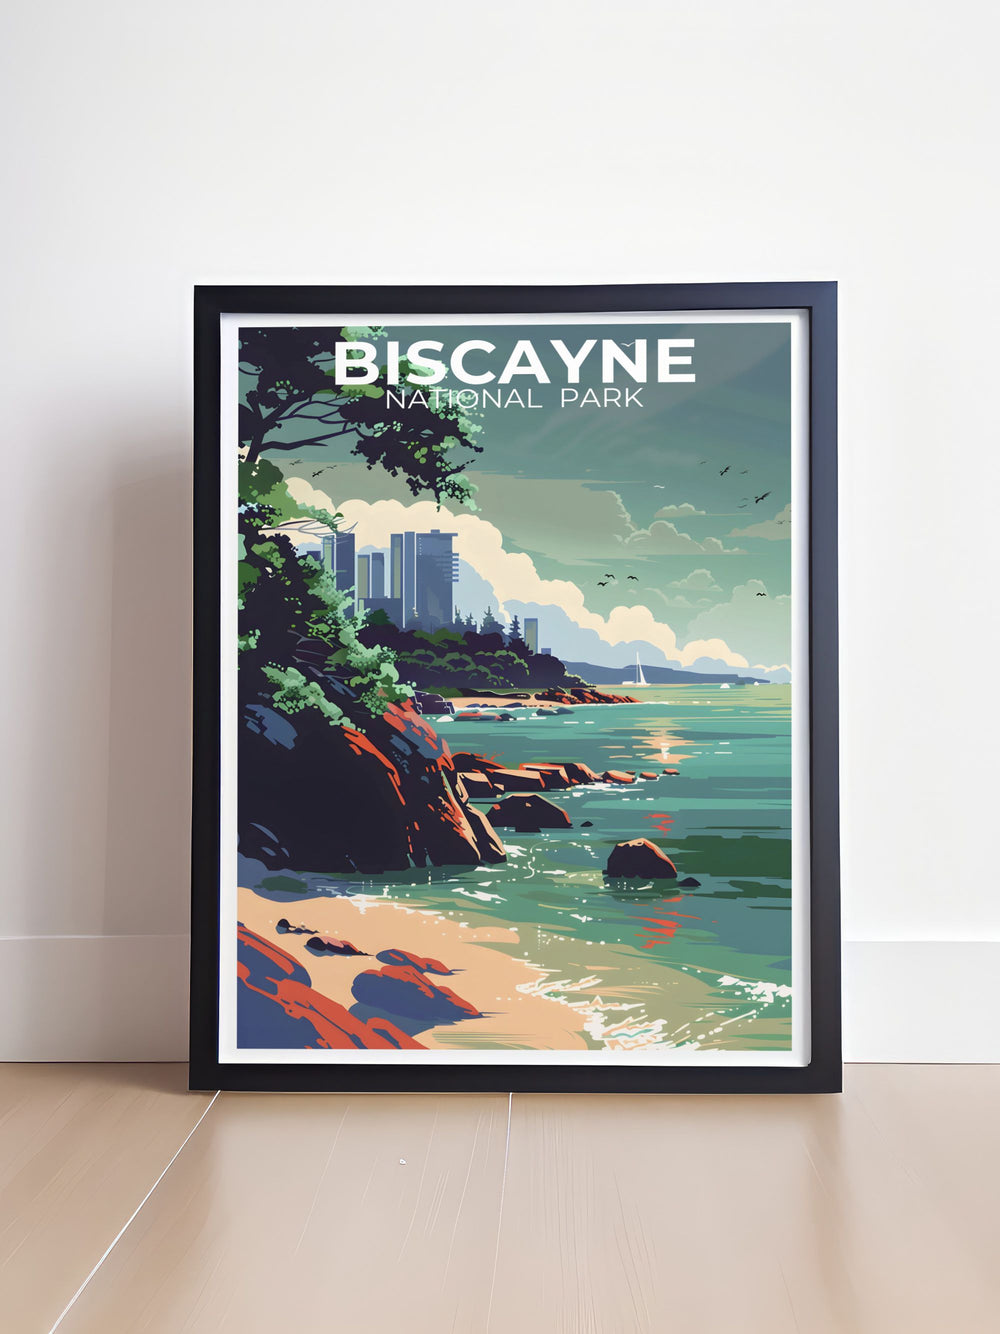 Beautiful Biscayne National Park travel poster capturing the scenic Biscayne Bay Trail and the underwater beauty of the coral reefs, perfect for enhancing your home or office with the parks iconic landmarks.